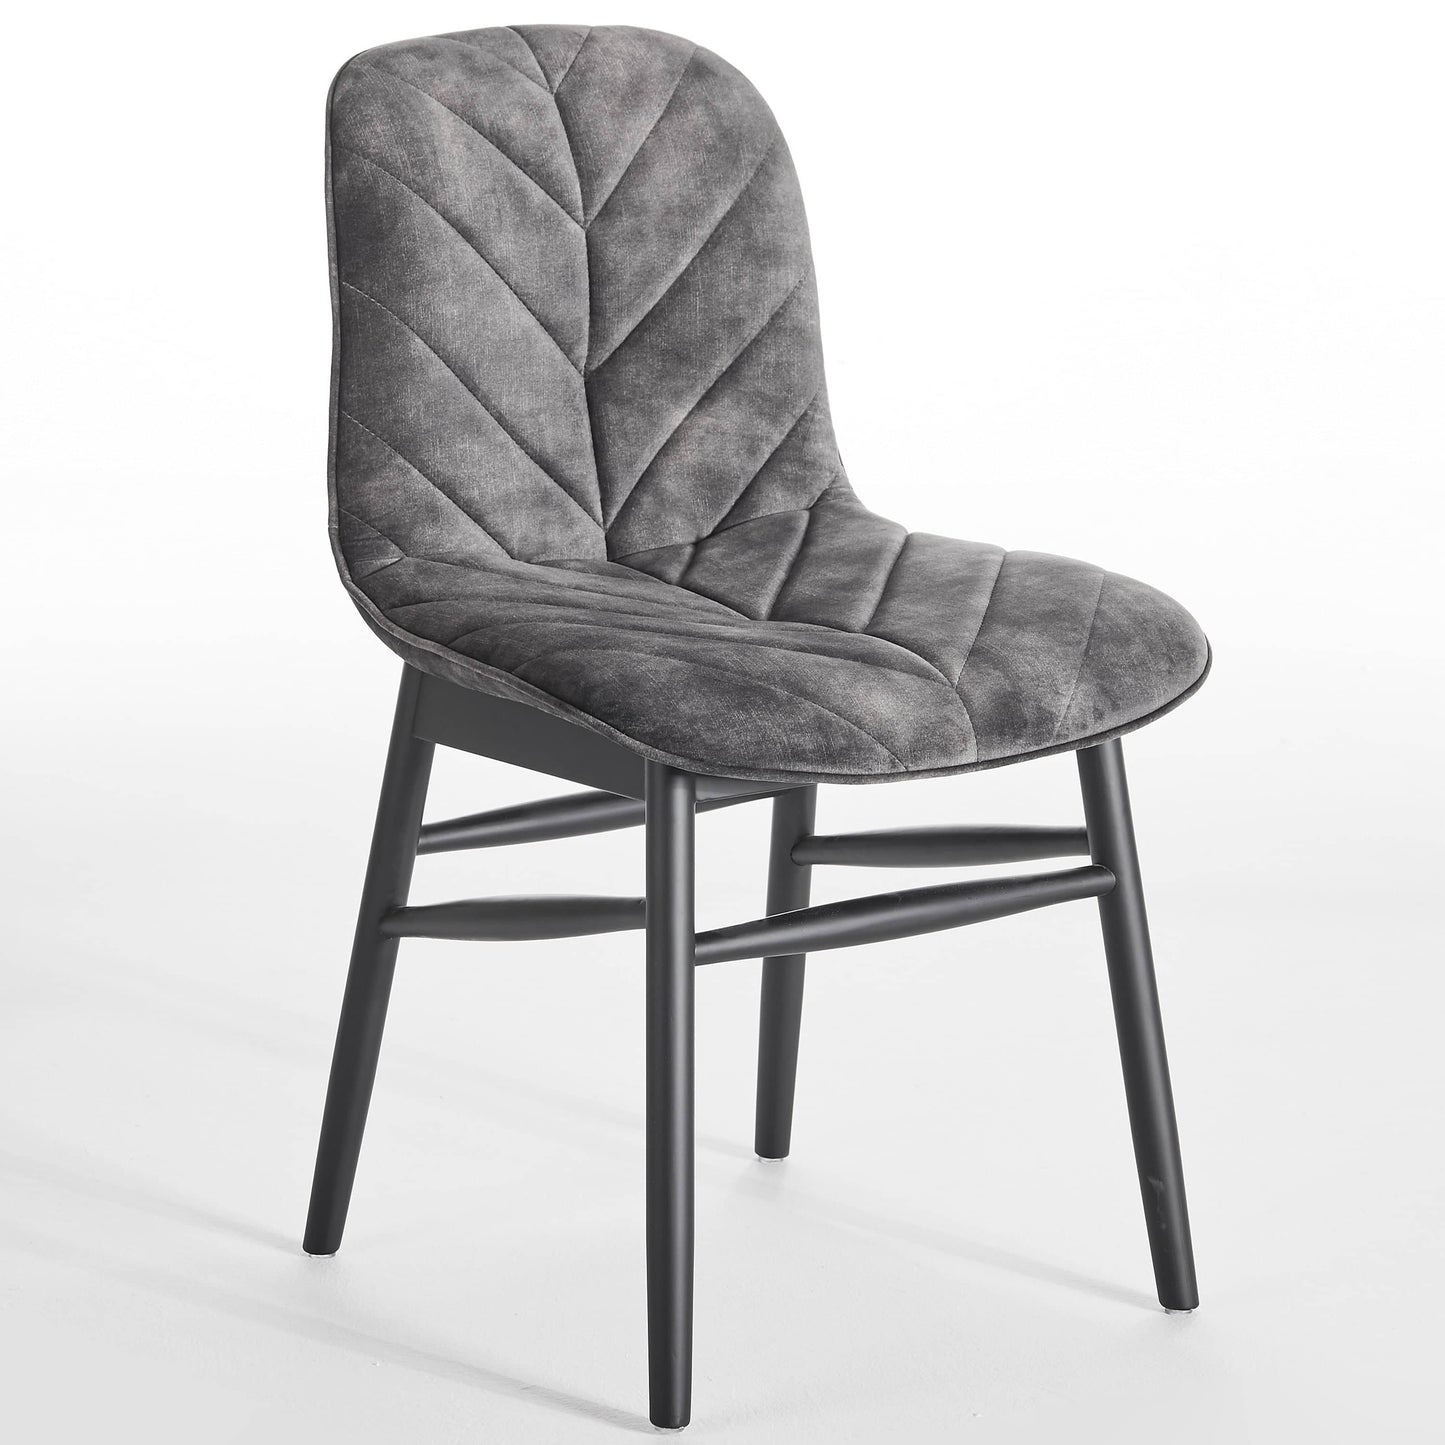 Leaf Dining Chair - Decent Charcoal